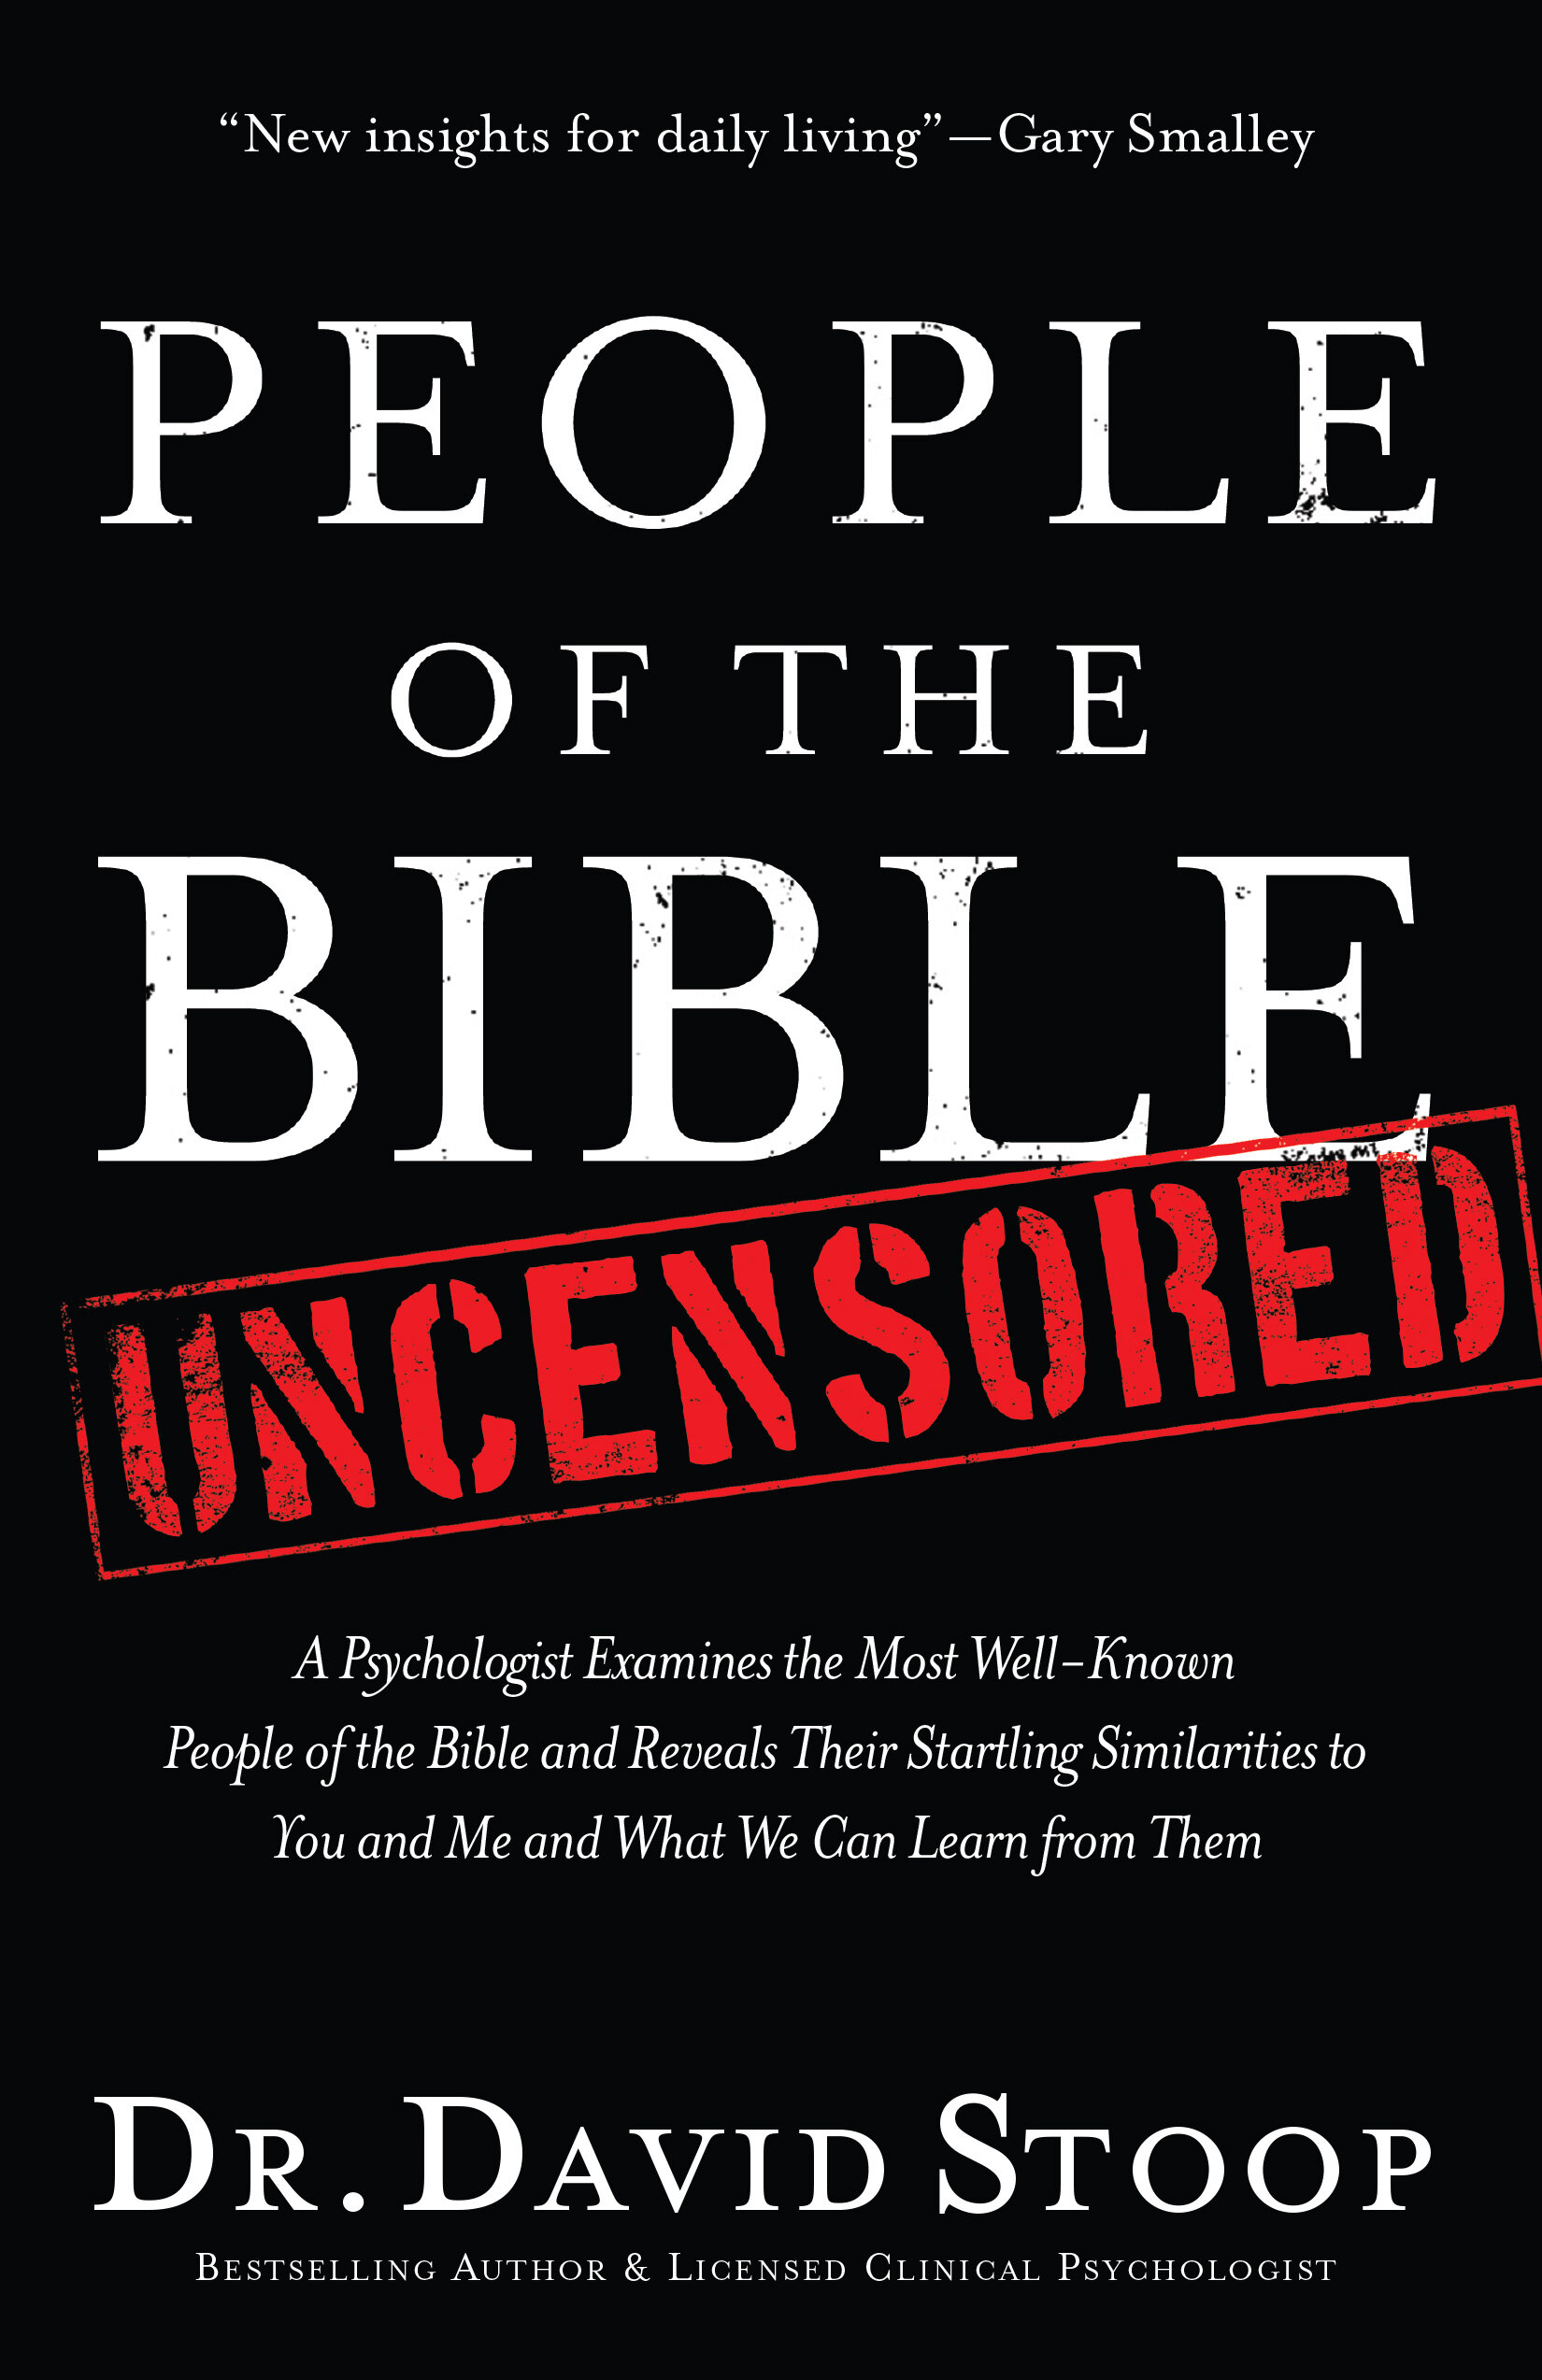 People of the Bible Uncensored